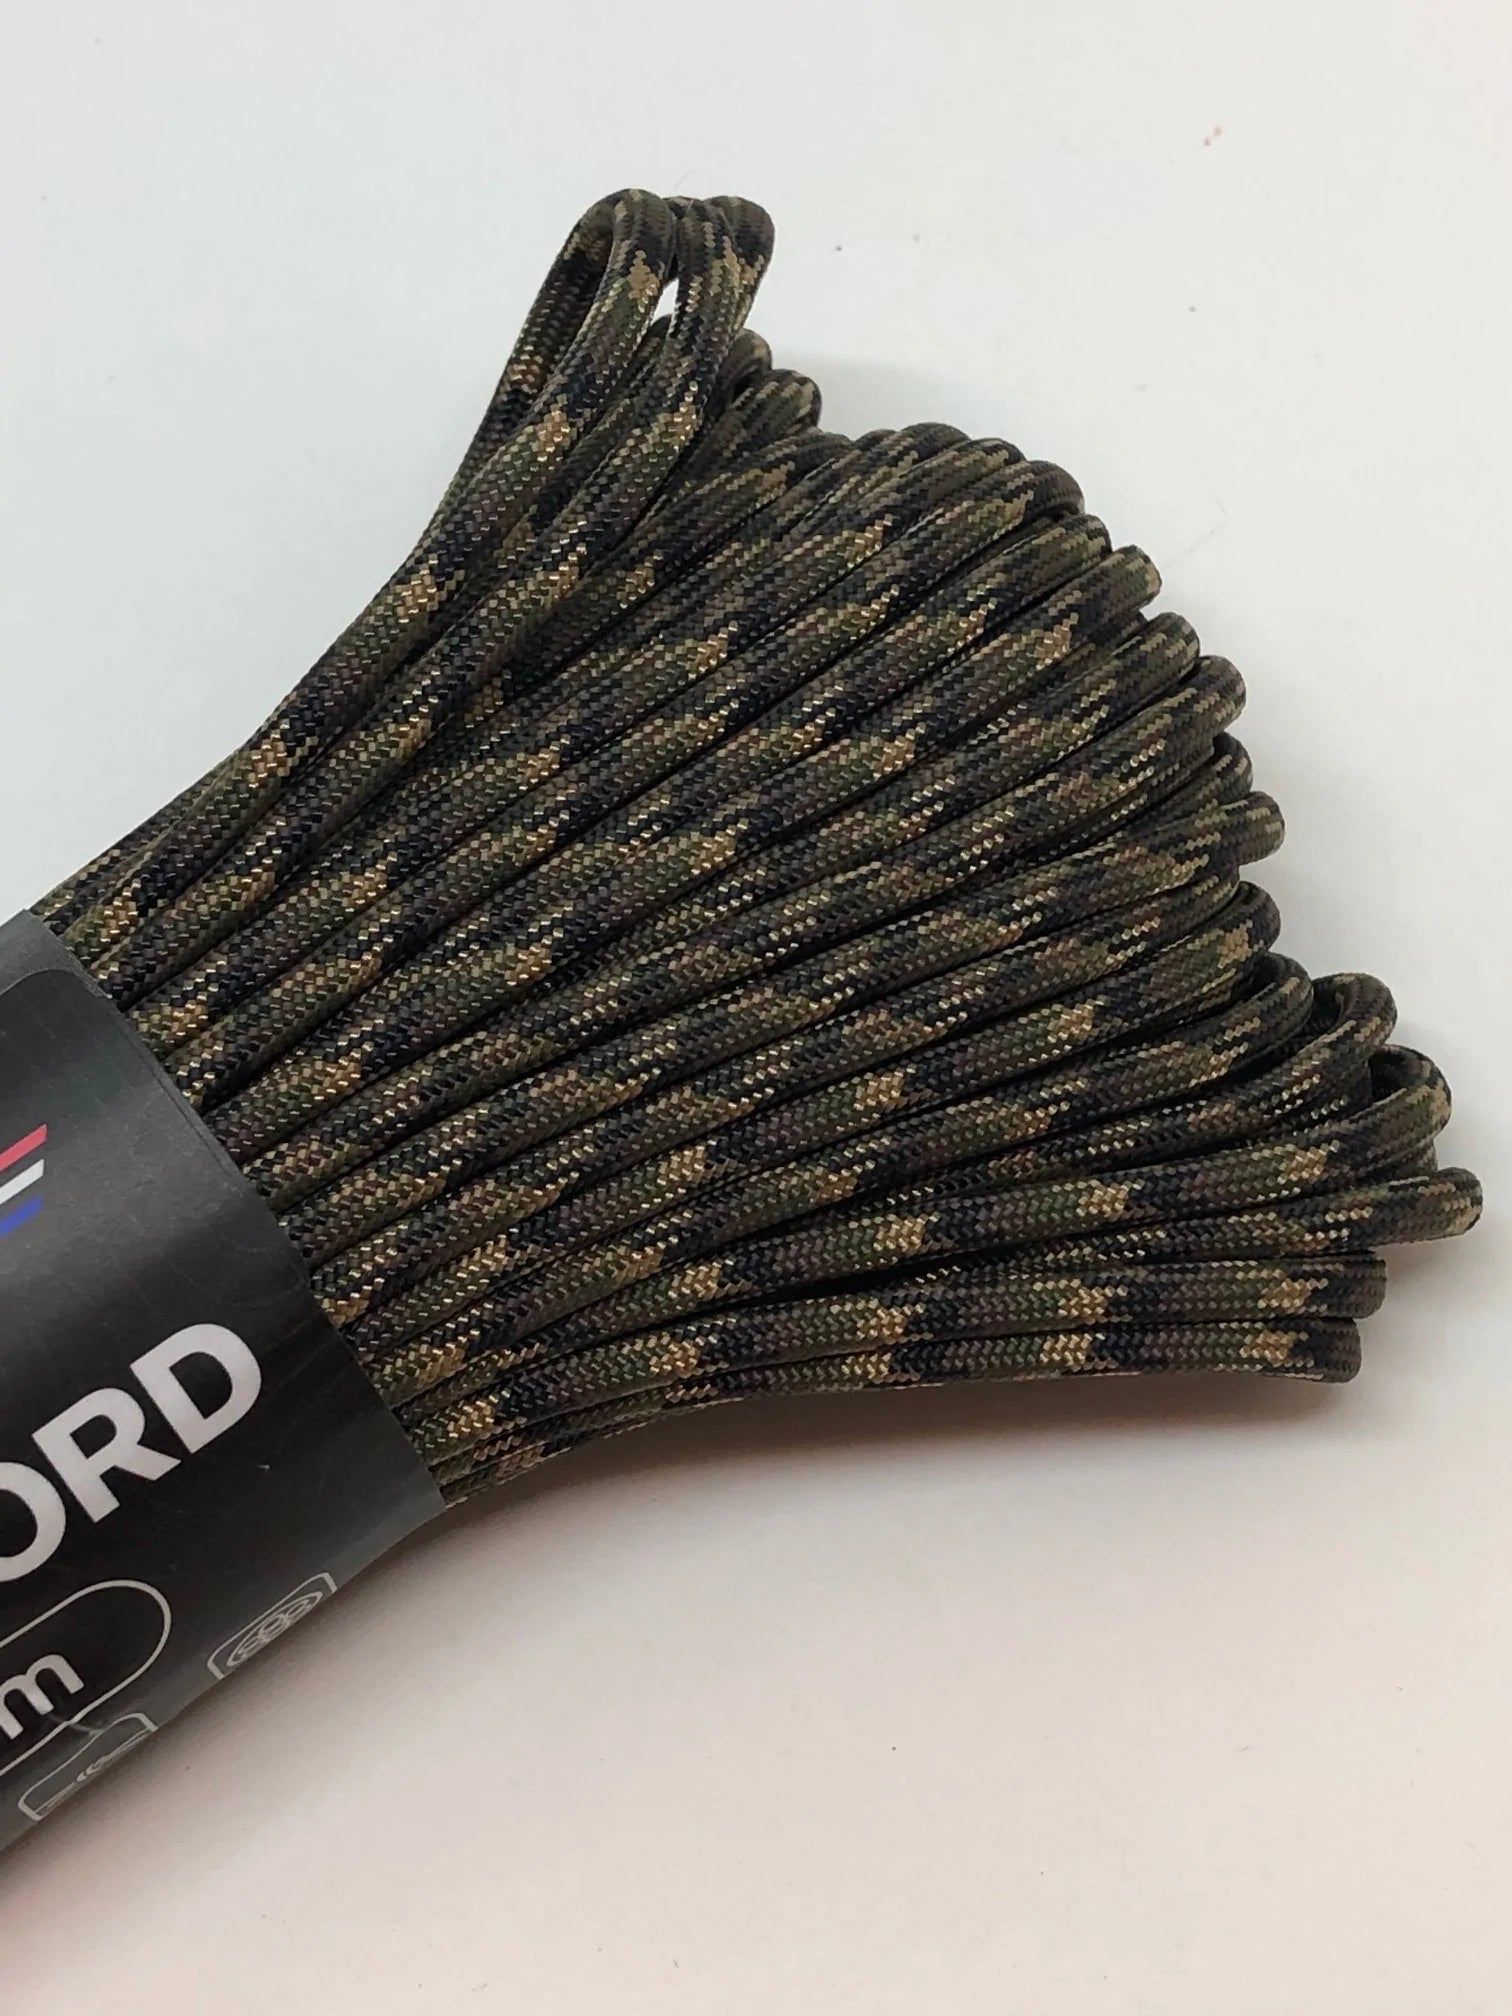 ATWOOD ROPE MFG 550 PARACORD 100FT - RECON